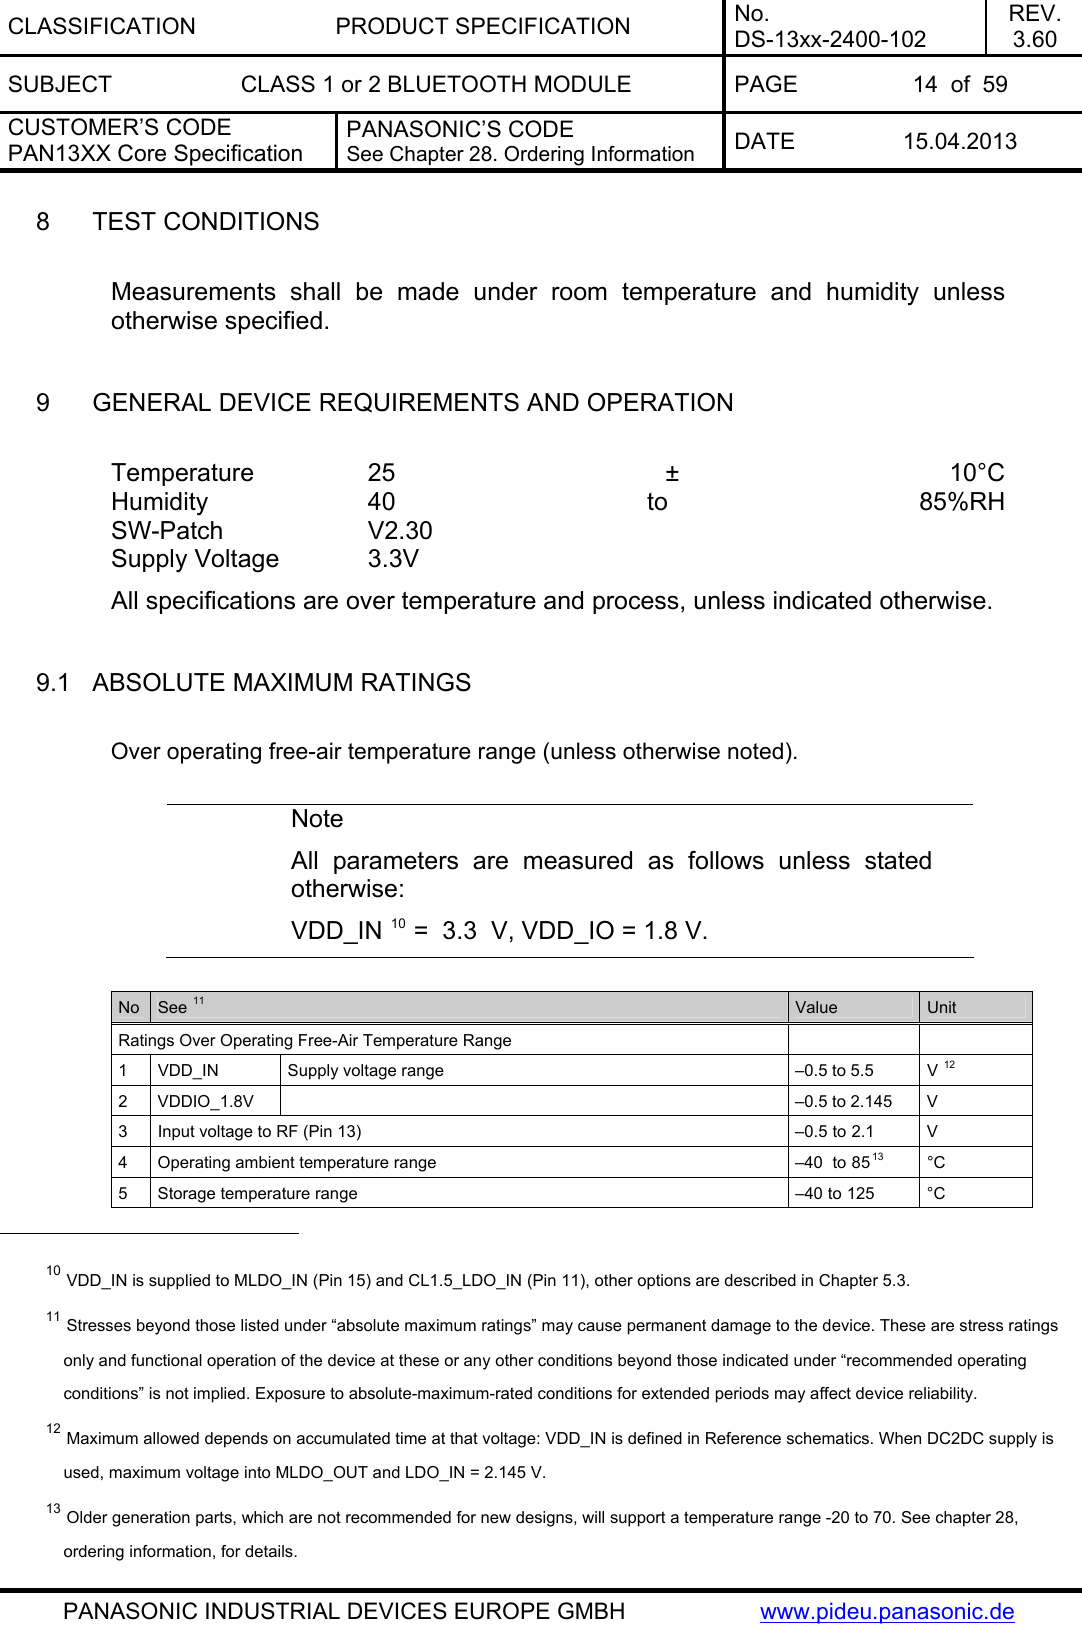 CLASSIFICATION PRODUCT SPECIFICATION No. DS-13xx-2400-102 REV. 3.60 SUBJECT  CLASS 1 or 2 BLUETOOTH MODULE  PAGE  14  of  59 CUSTOMER’S CODE PAN13XX Core Specification PANASONIC’S CODE See Chapter 28. Ordering Information  DATE 15.04.2013   PANASONIC INDUSTRIAL DEVICES EUROPE GMBH  www.pideu.panasonic.de  8  TEST CONDITIONS  Measurements shall be made under room temperature and humidity unless otherwise specified.  9  GENERAL DEVICE REQUIREMENTS AND OPERATION  Temperature  25 ± 10°C Humidity   40  to  85%RH SW-Patch   V2.30 Supply Voltage    3.3V  All specifications are over temperature and process, unless indicated otherwise.  9.1  ABSOLUTE MAXIMUM RATINGS  Over operating free-air temperature range (unless otherwise noted).  Note All parameters are measured as follows unless stated otherwise: VDD_IN 10 =  3.3  V, VDD_IO = 1.8 V.  No  See 11 Value  Unit Ratings Over Operating Free-Air Temperature Range     1  VDD_IN  Supply voltage range  –0.5 to 5.5  V 12 2  VDDIO_1.8V    –0.5 to 2.145  V  3  Input voltage to RF (Pin 13)  –0.5 to 2.1  V 4  Operating ambient temperature range  –40  to 8513 °C 5  Storage temperature range  –40 to 125  °C                                                  10 VDD_IN is supplied to MLDO_IN (Pin 15) and CL1.5_LDO_IN (Pin 11), other options are described in Chapter 5.3. 11 Stresses beyond those listed under “absolute maximum ratings” may cause permanent damage to the device. These are stress ratings only and functional operation of the device at these or any other conditions beyond those indicated under “recommended operating conditions” is not implied. Exposure to absolute-maximum-rated conditions for extended periods may affect device reliability. 12 Maximum allowed depends on accumulated time at that voltage: VDD_IN is defined in Reference schematics. When DC2DC supply is used, maximum voltage into MLDO_OUT and LDO_IN = 2.145 V. 13 Older generation parts, which are not recommended for new designs, will support a temperature range -20 to 70. See chapter 28, ordering information, for details.  